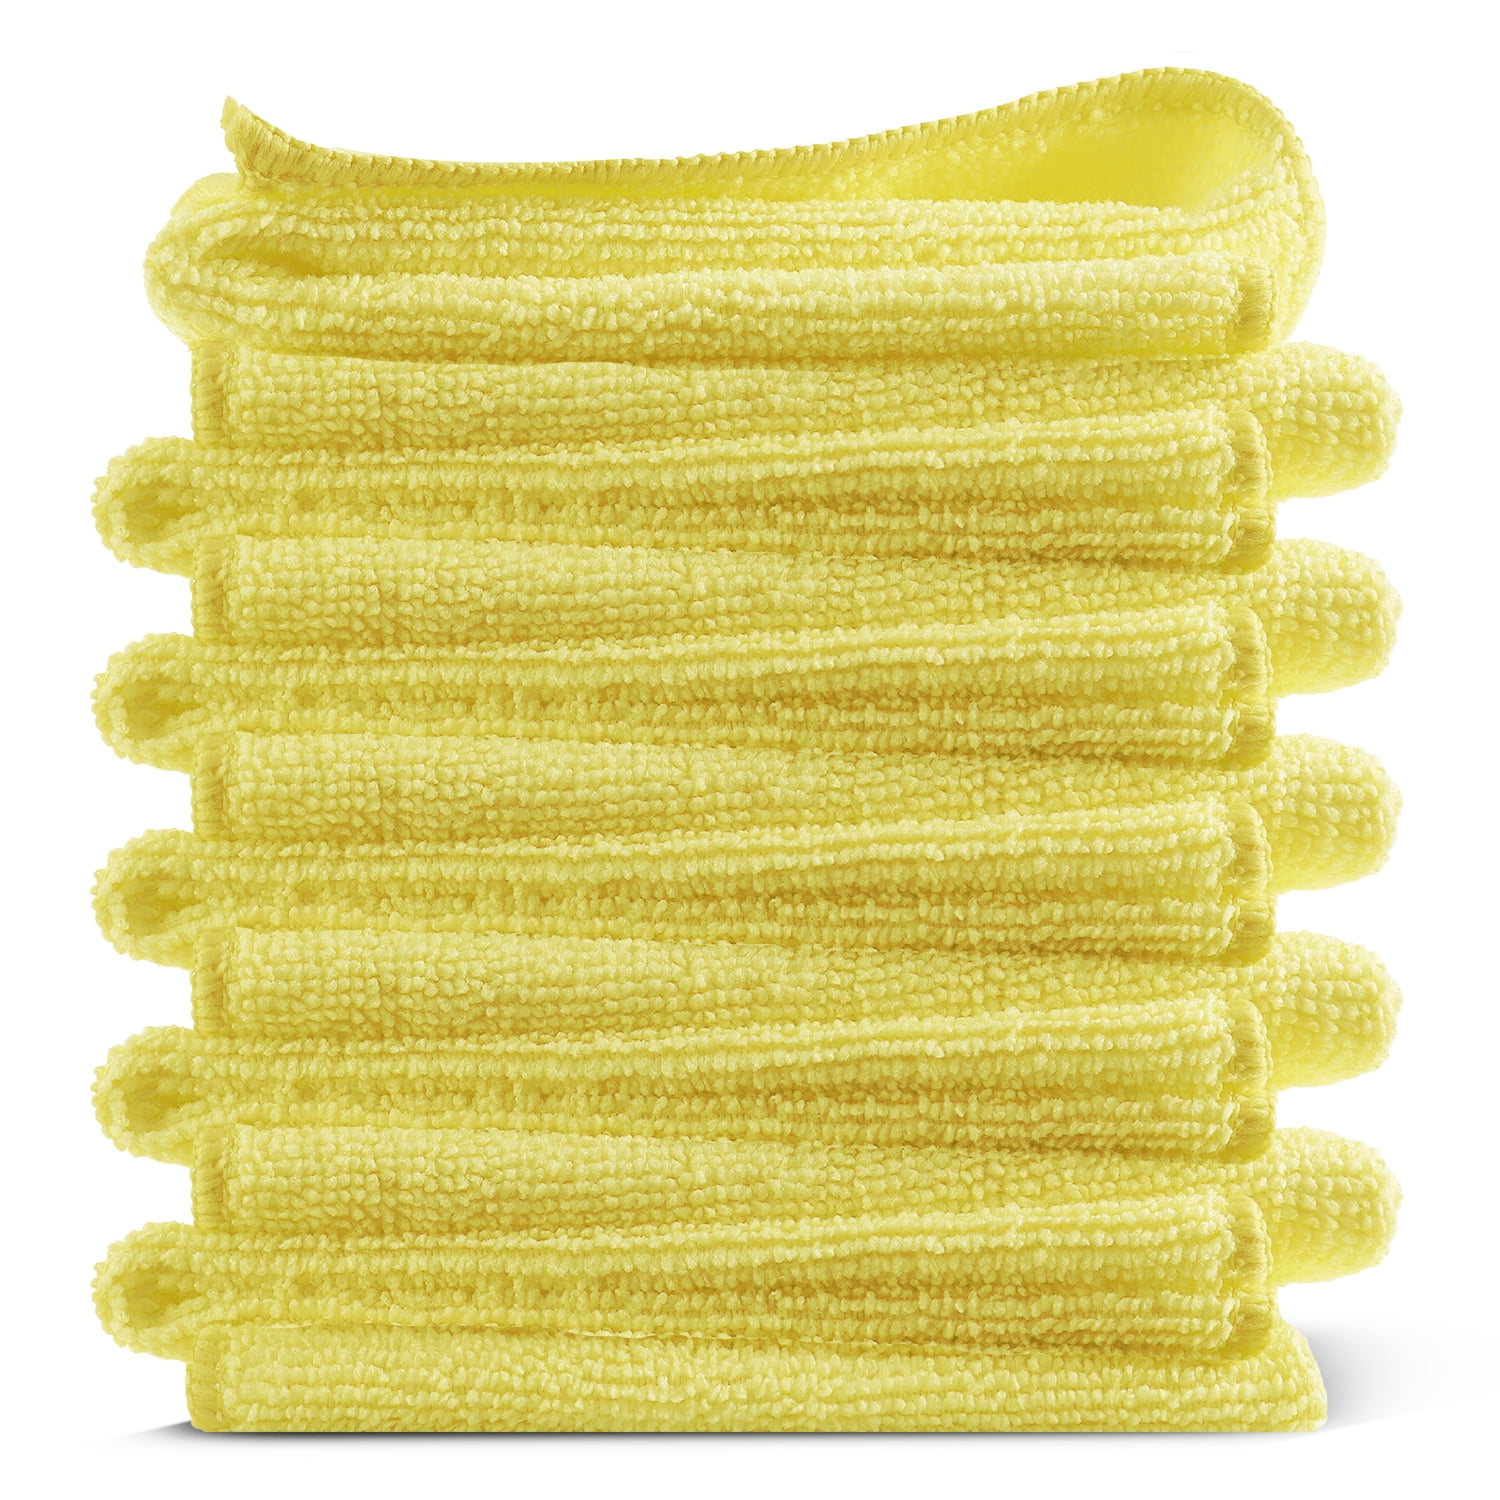  Scrub Daddy Microfiber Cloths - All Purpose Super Soft & Ultra  Plush Microfiber Towels - Contains Grey & Yellow Cleaning Rags (2 Pack) :  Health & Household